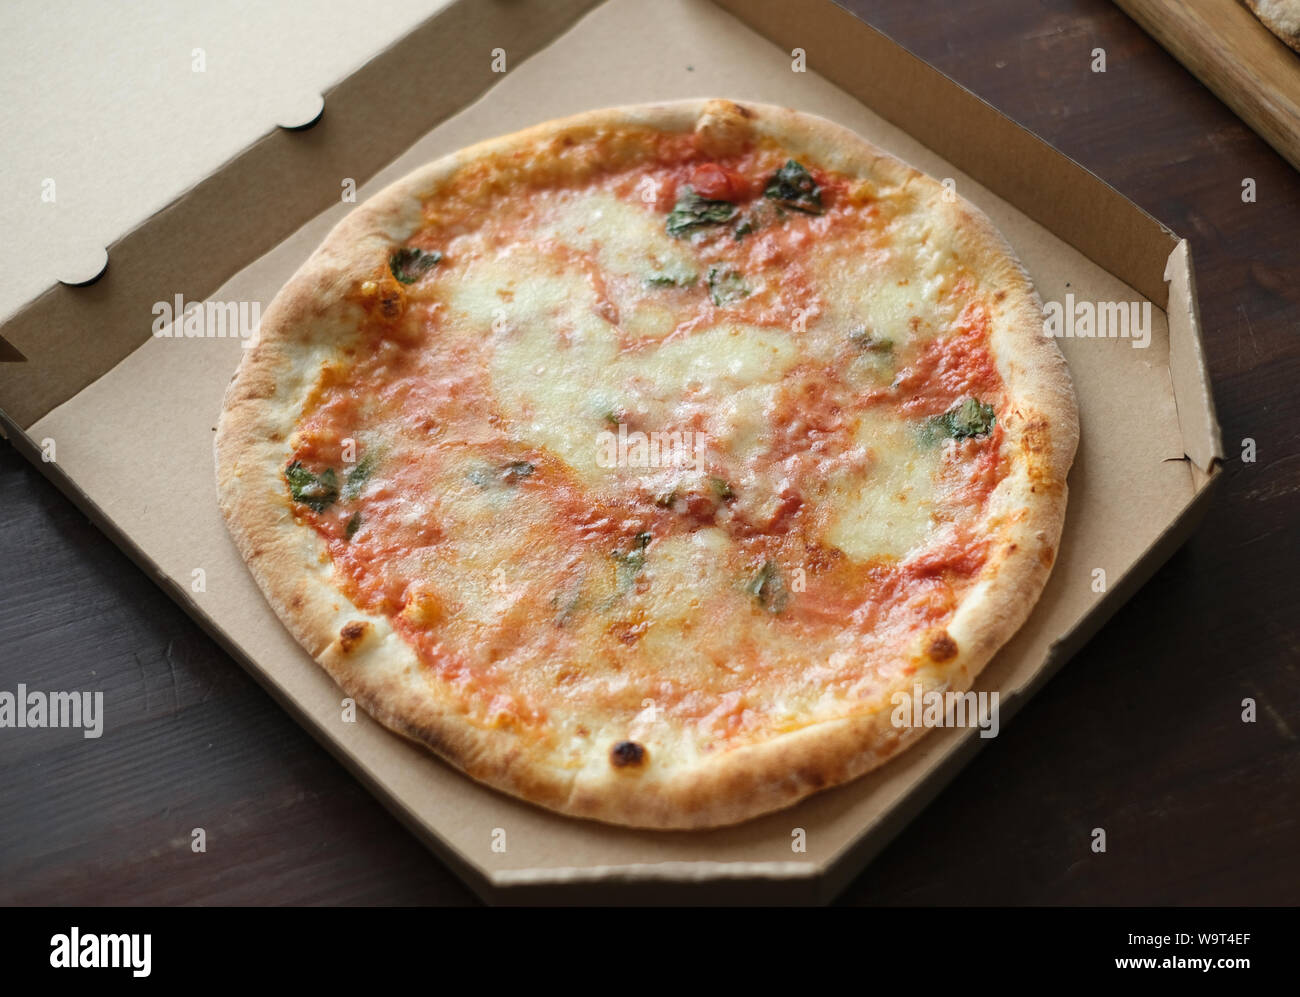 Food. Delicious pizza on the table Stock Photo